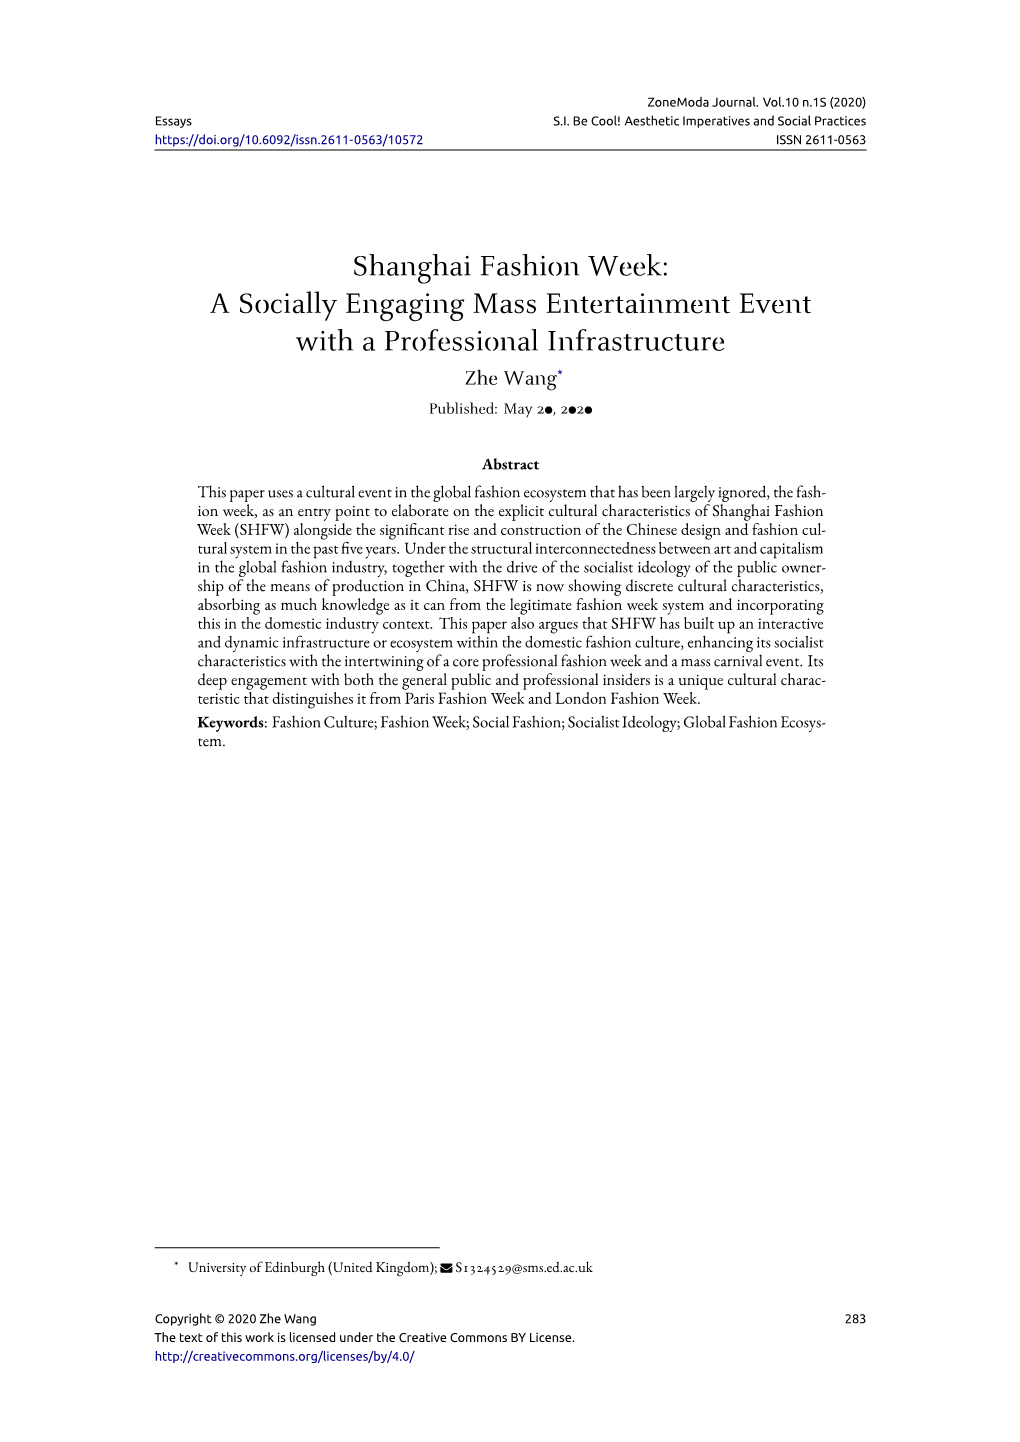 Shanghai Fashion Week: a Socially Engaging Mass Entertainment Event with a Professional Infrastructure Zhe Wang* Published: May 20, 2020